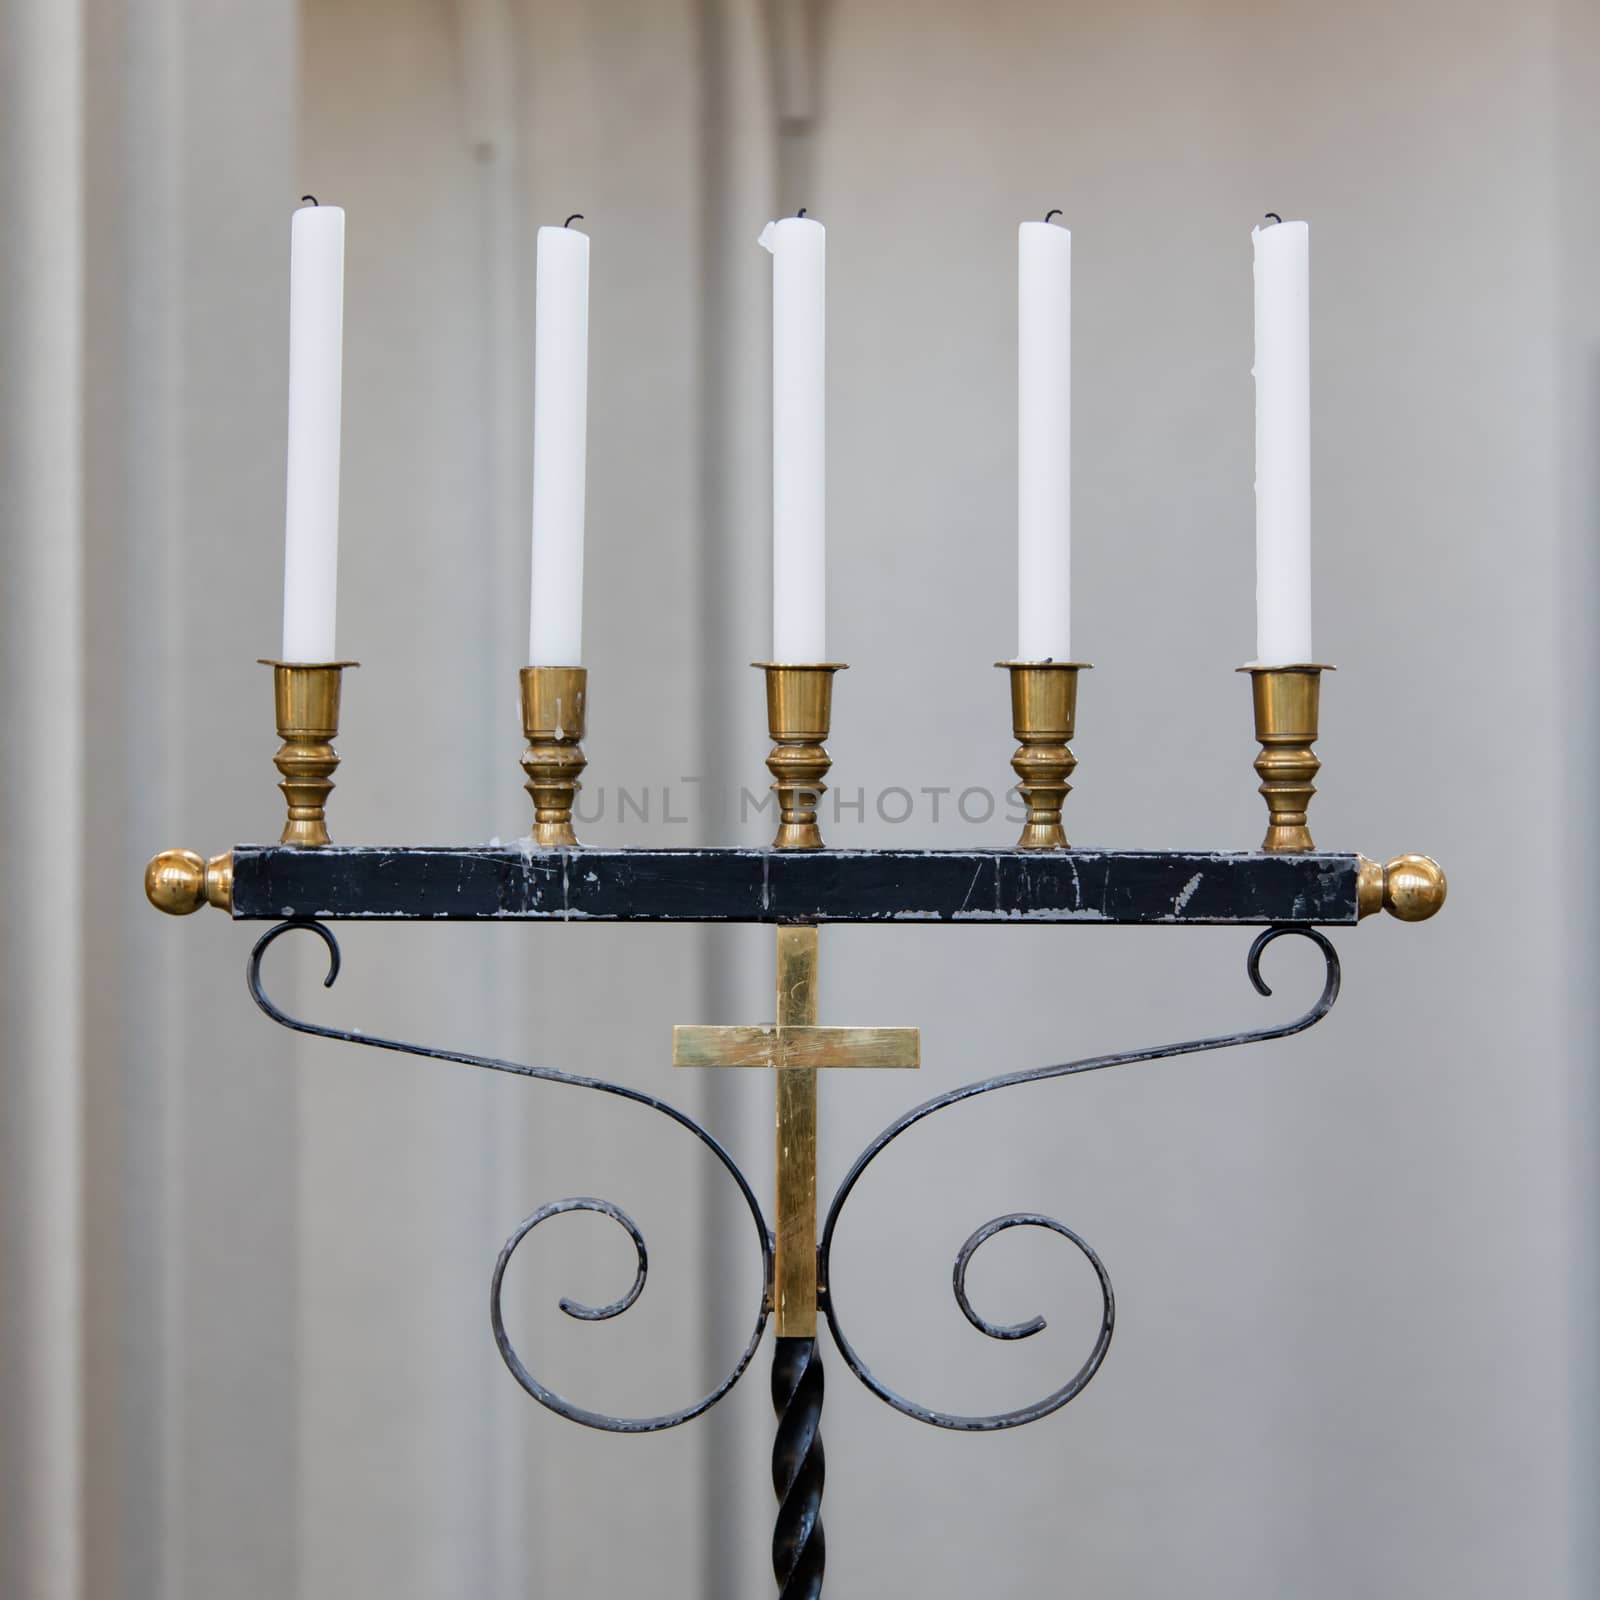 Old candleholder with 5 candles by michaklootwijk